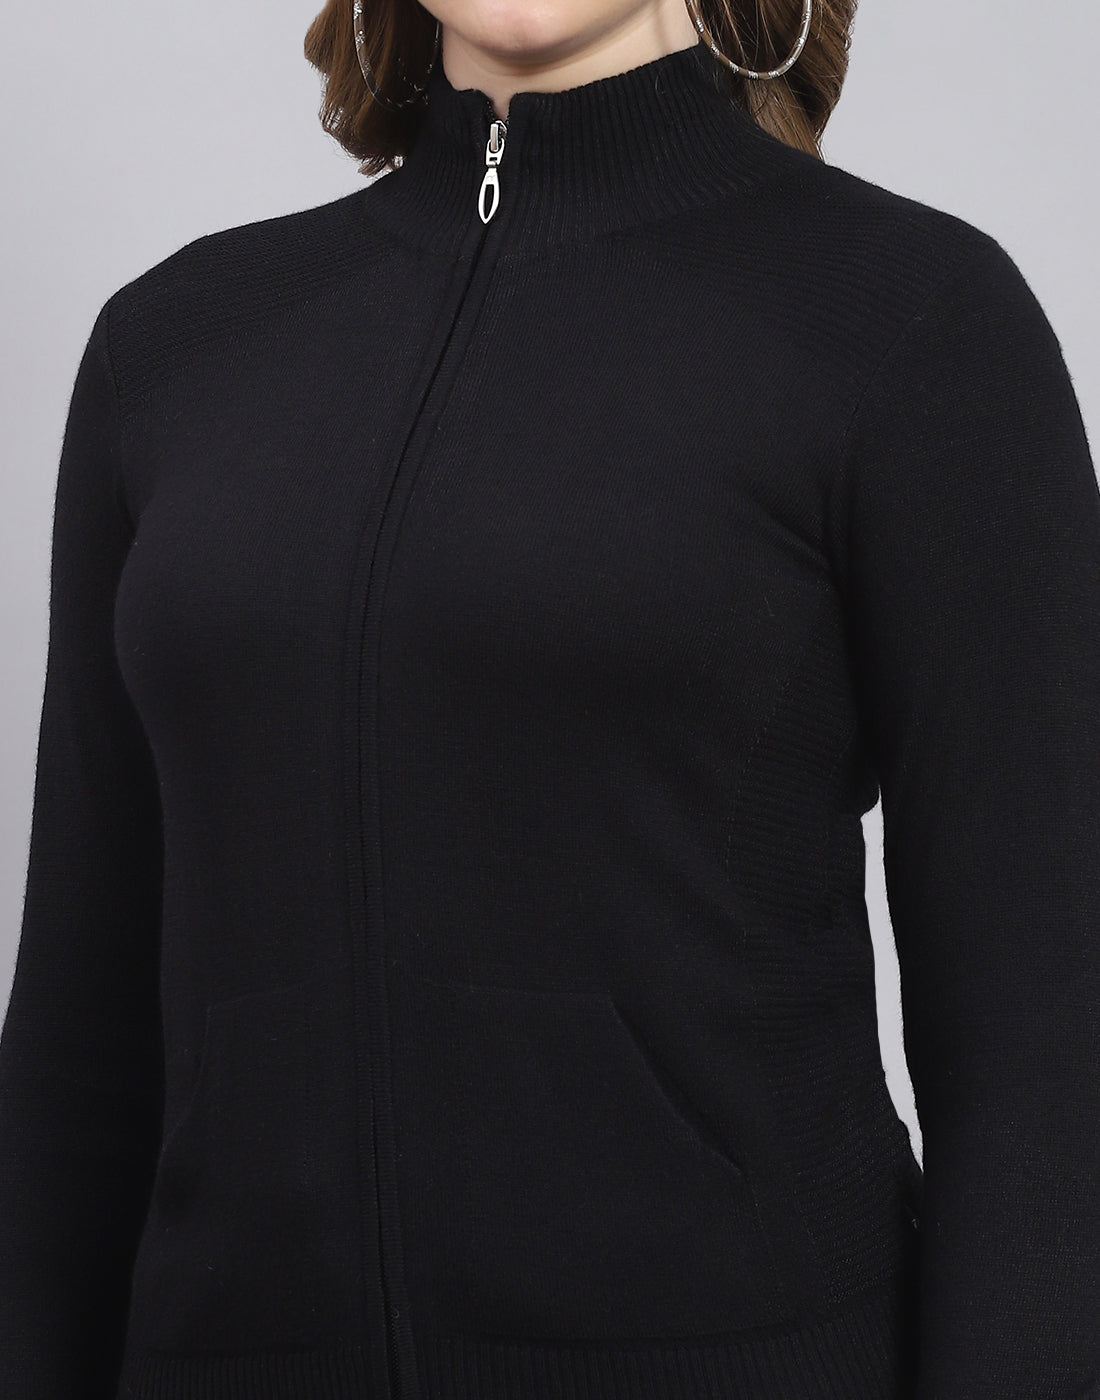 Women Black Solid Stand Collar Full Sleeve Sweater